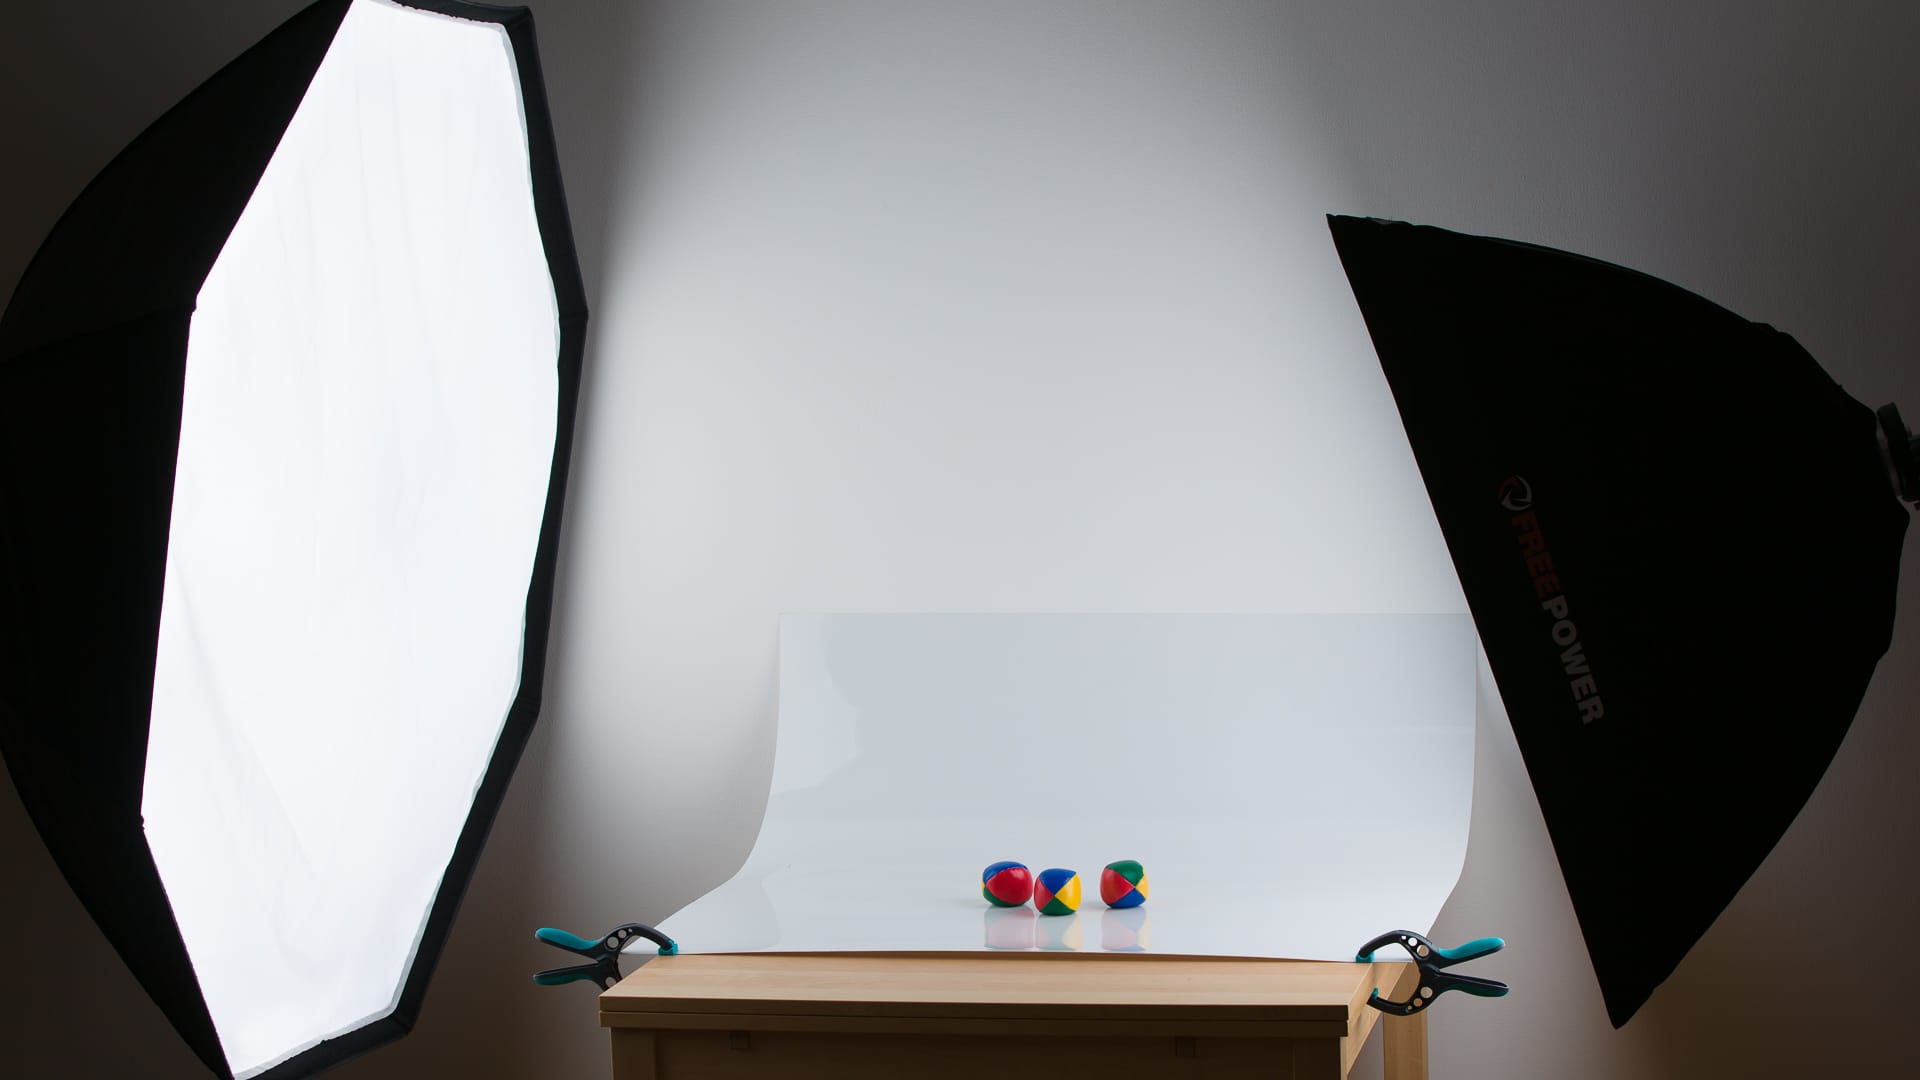 How to Shoot Products on White Backgrounds